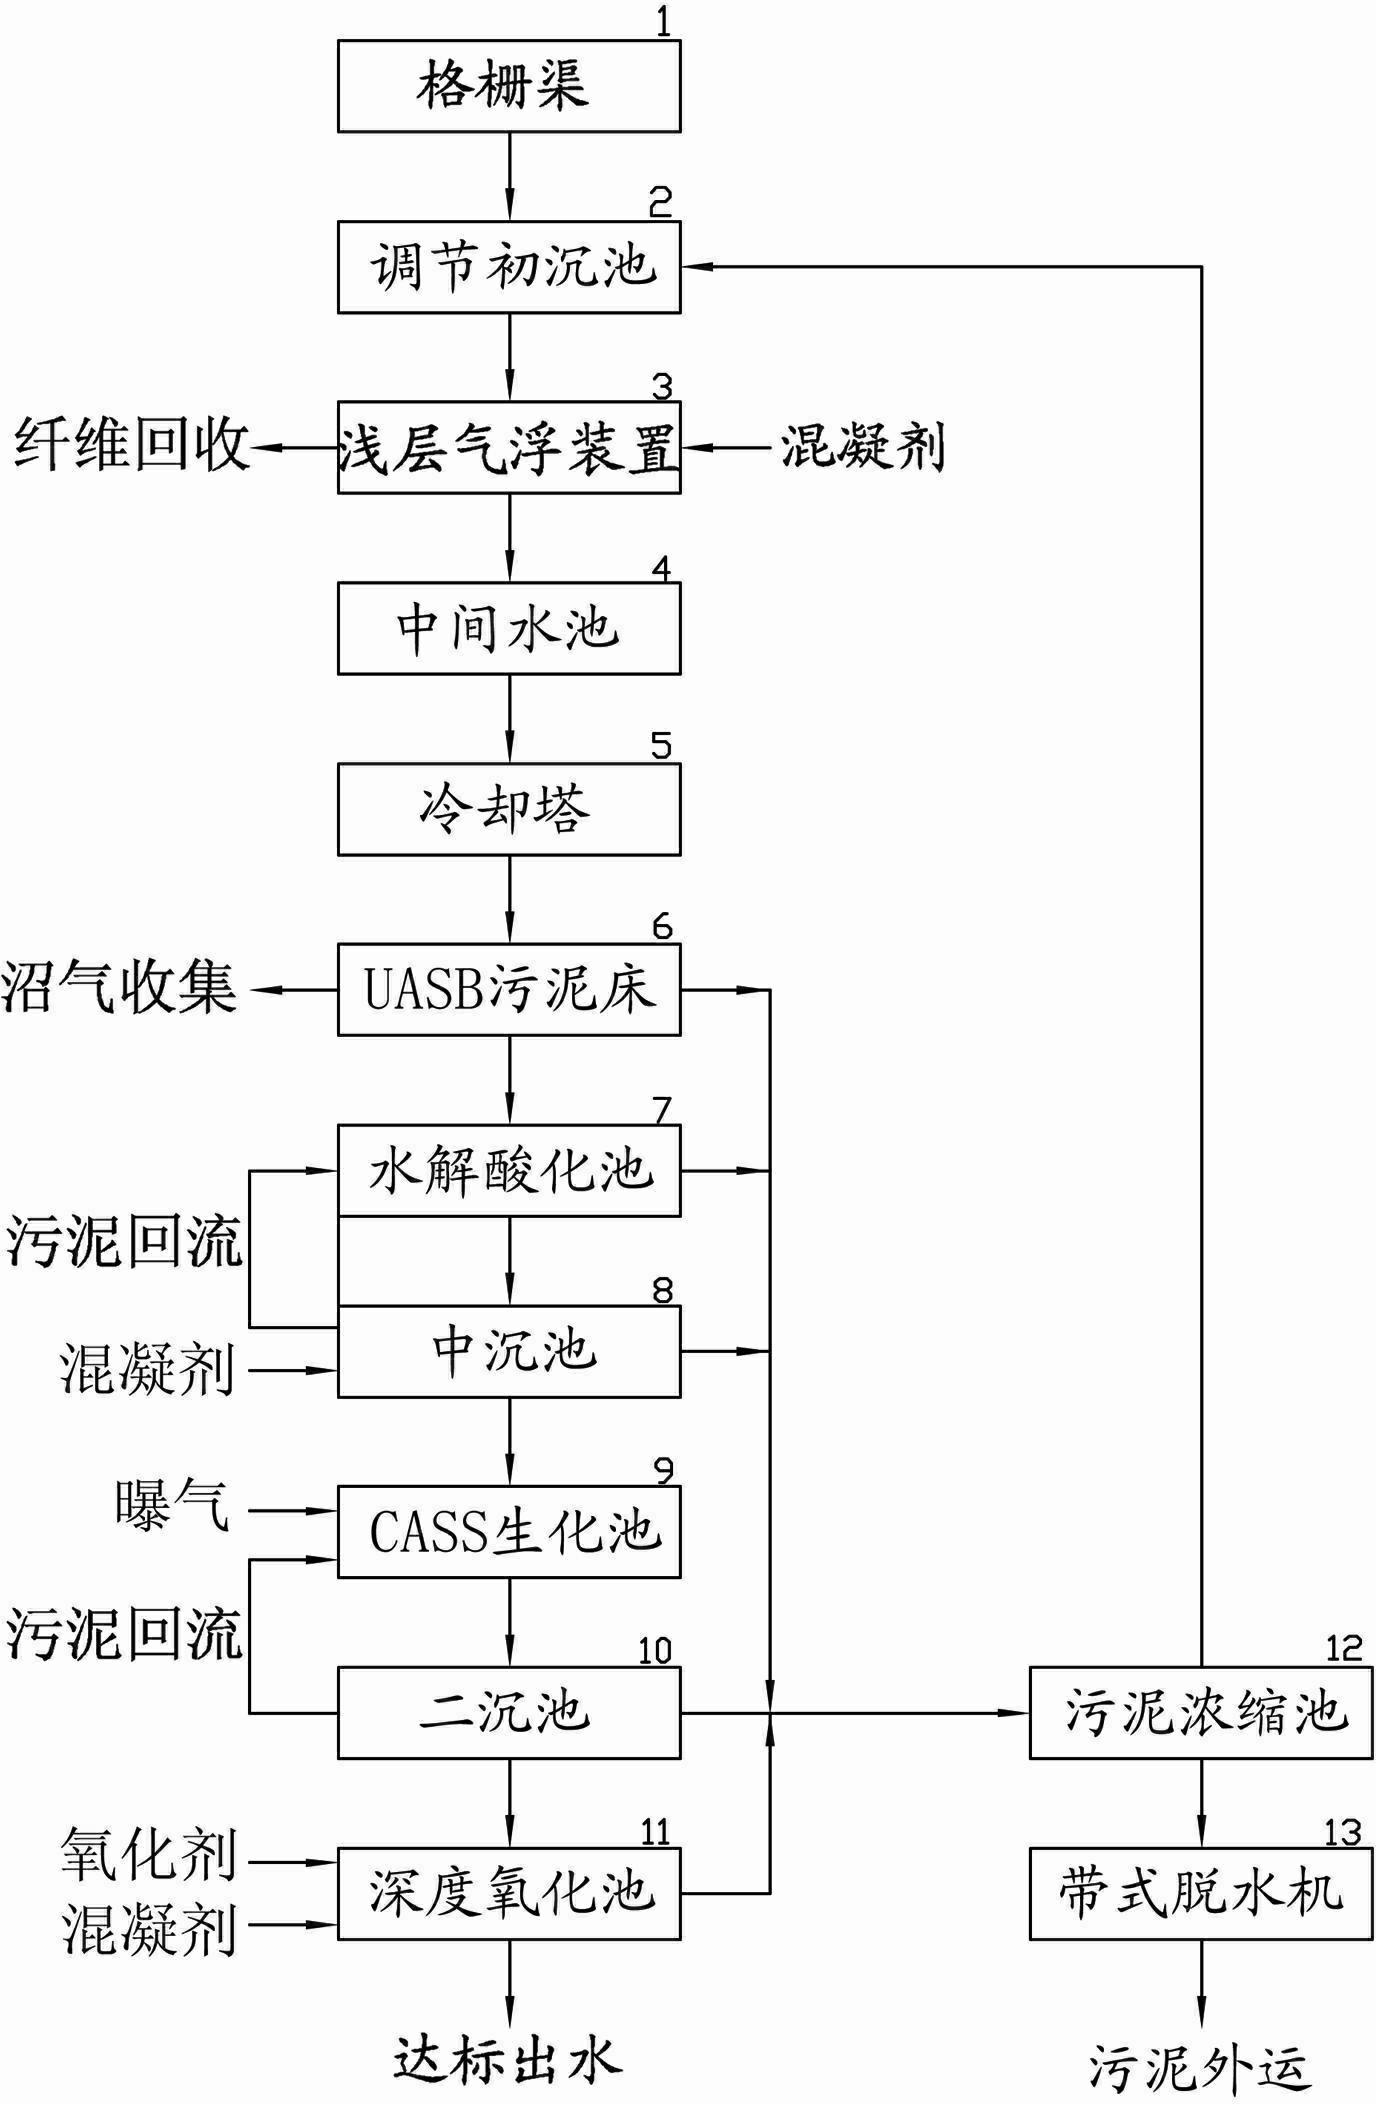 Device for treating wastewater produced in production process of alkaline peroxide mechanical pulp (APMP)